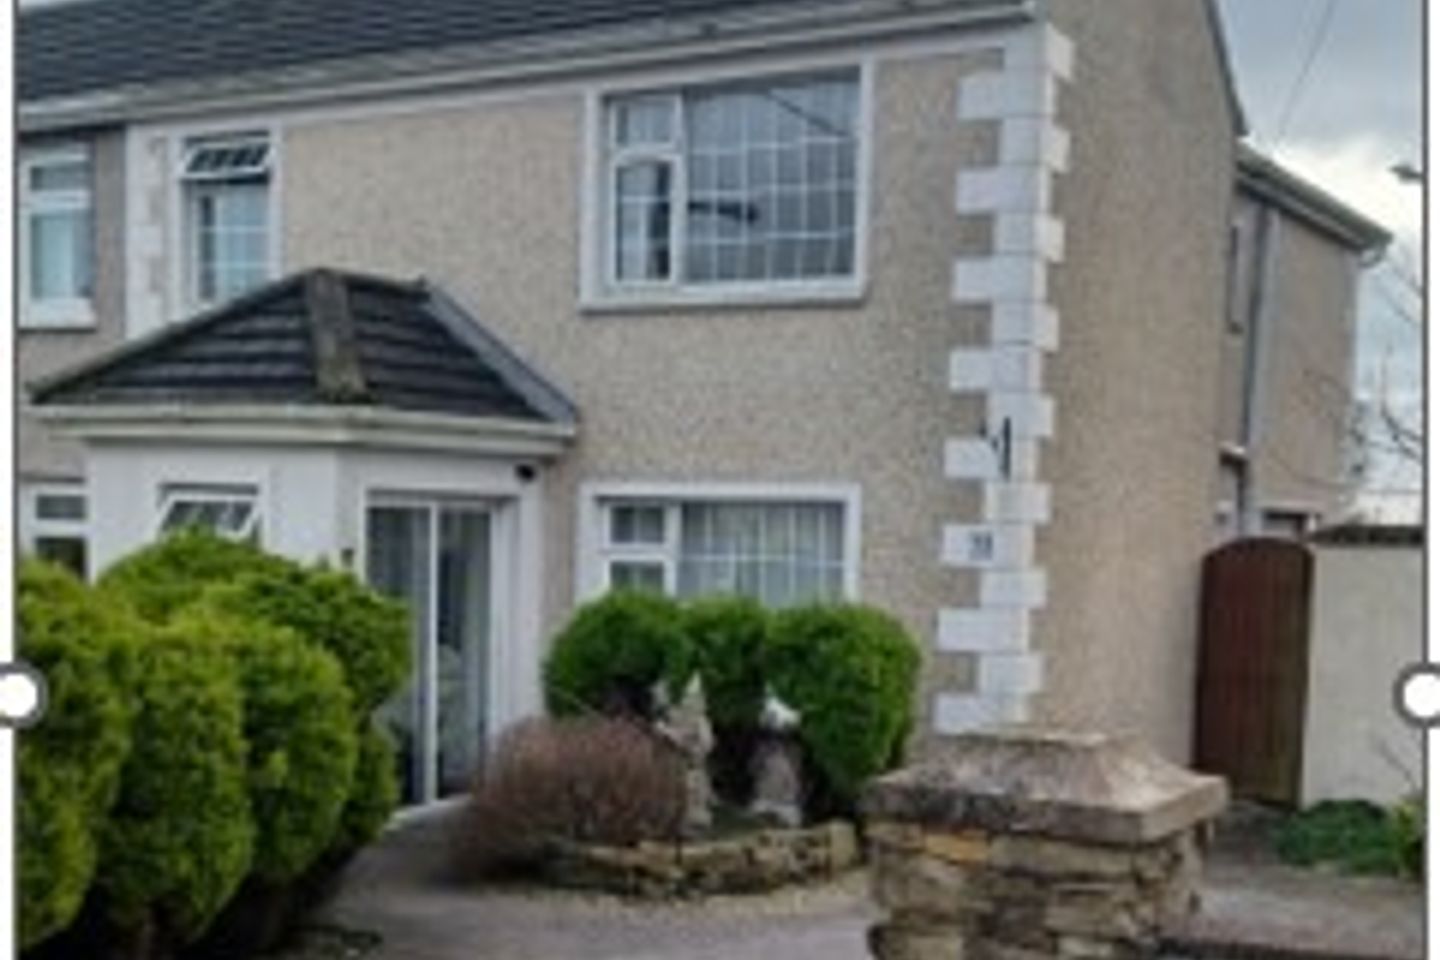 78 Sarsfield Terrace, Youghal, Co. Cork